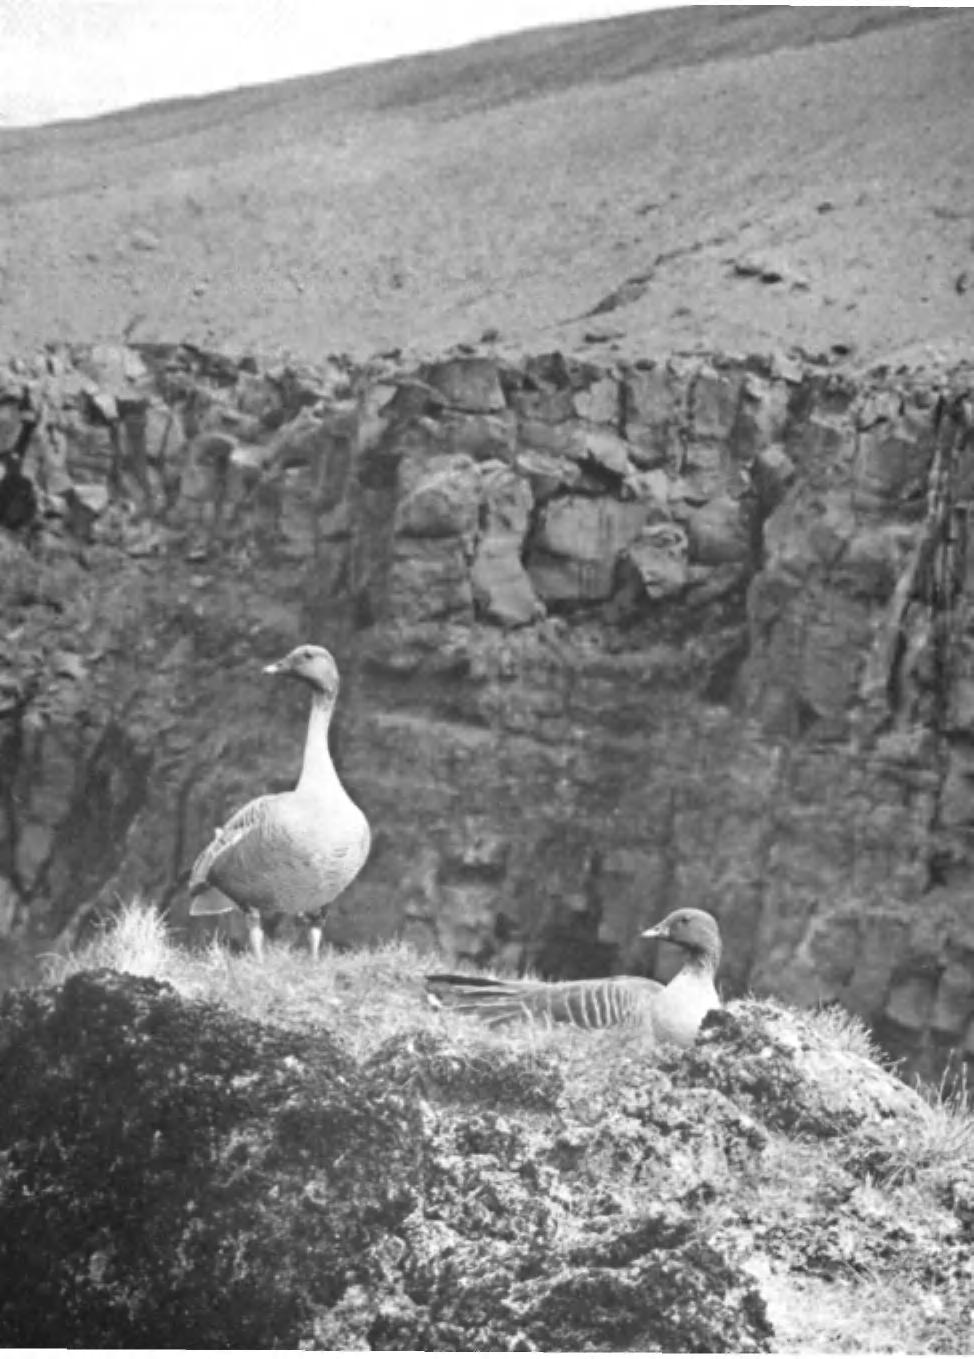 PLATE 15 Niall Rankin PINK-FOOTED GEESE (Anser arvensis brachyrhynchus) Krossargil, North-Central Iceland: June 1954 This shows clearly the citadel of the nest-site, with